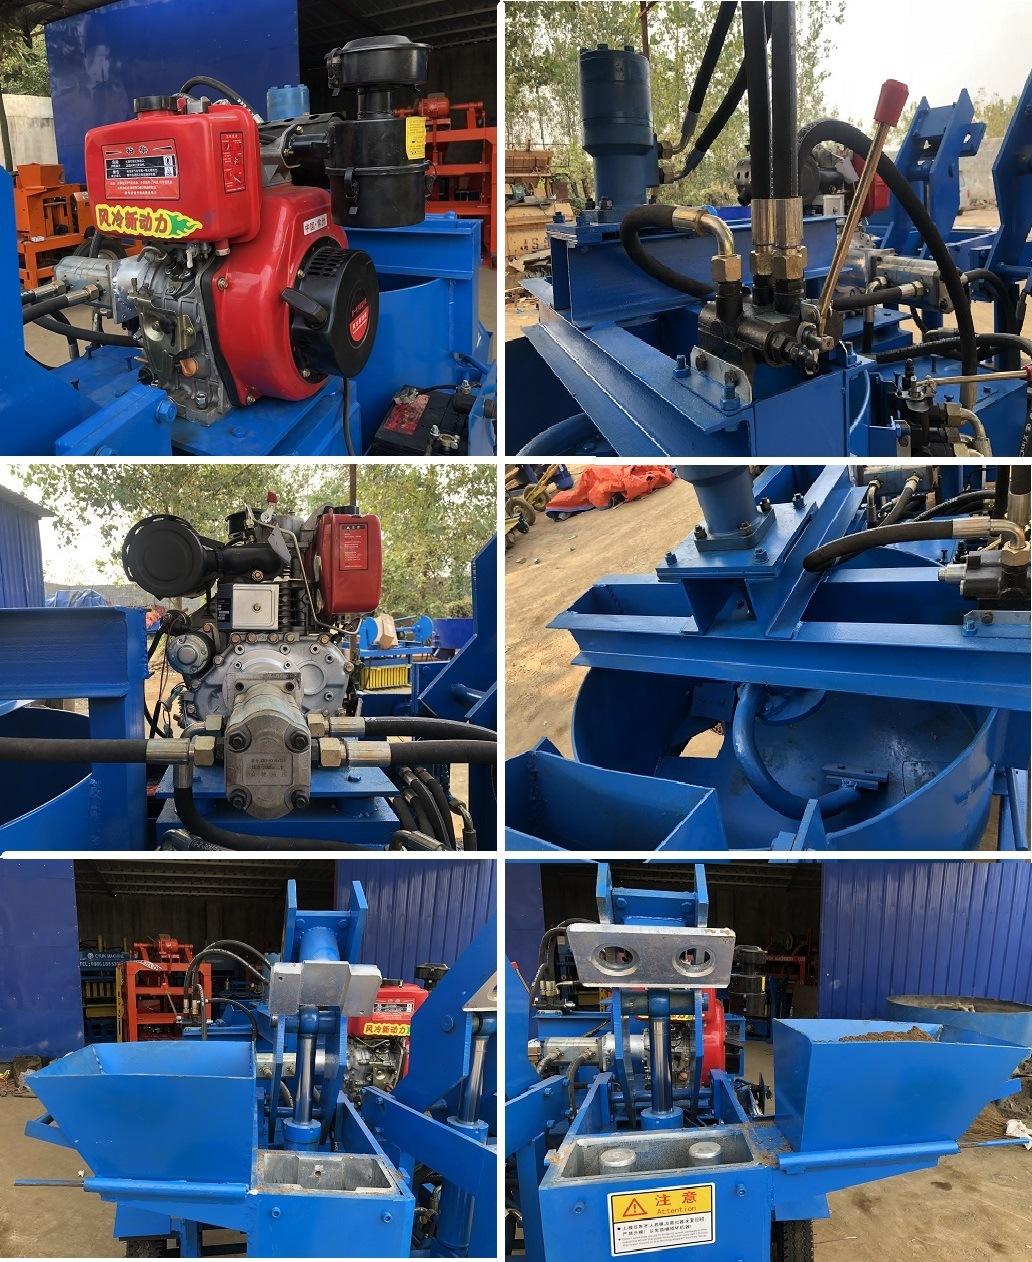 Xinming Moveable M7m2 Clay Soil Interlocking Clay Brick Machine with Factory Price